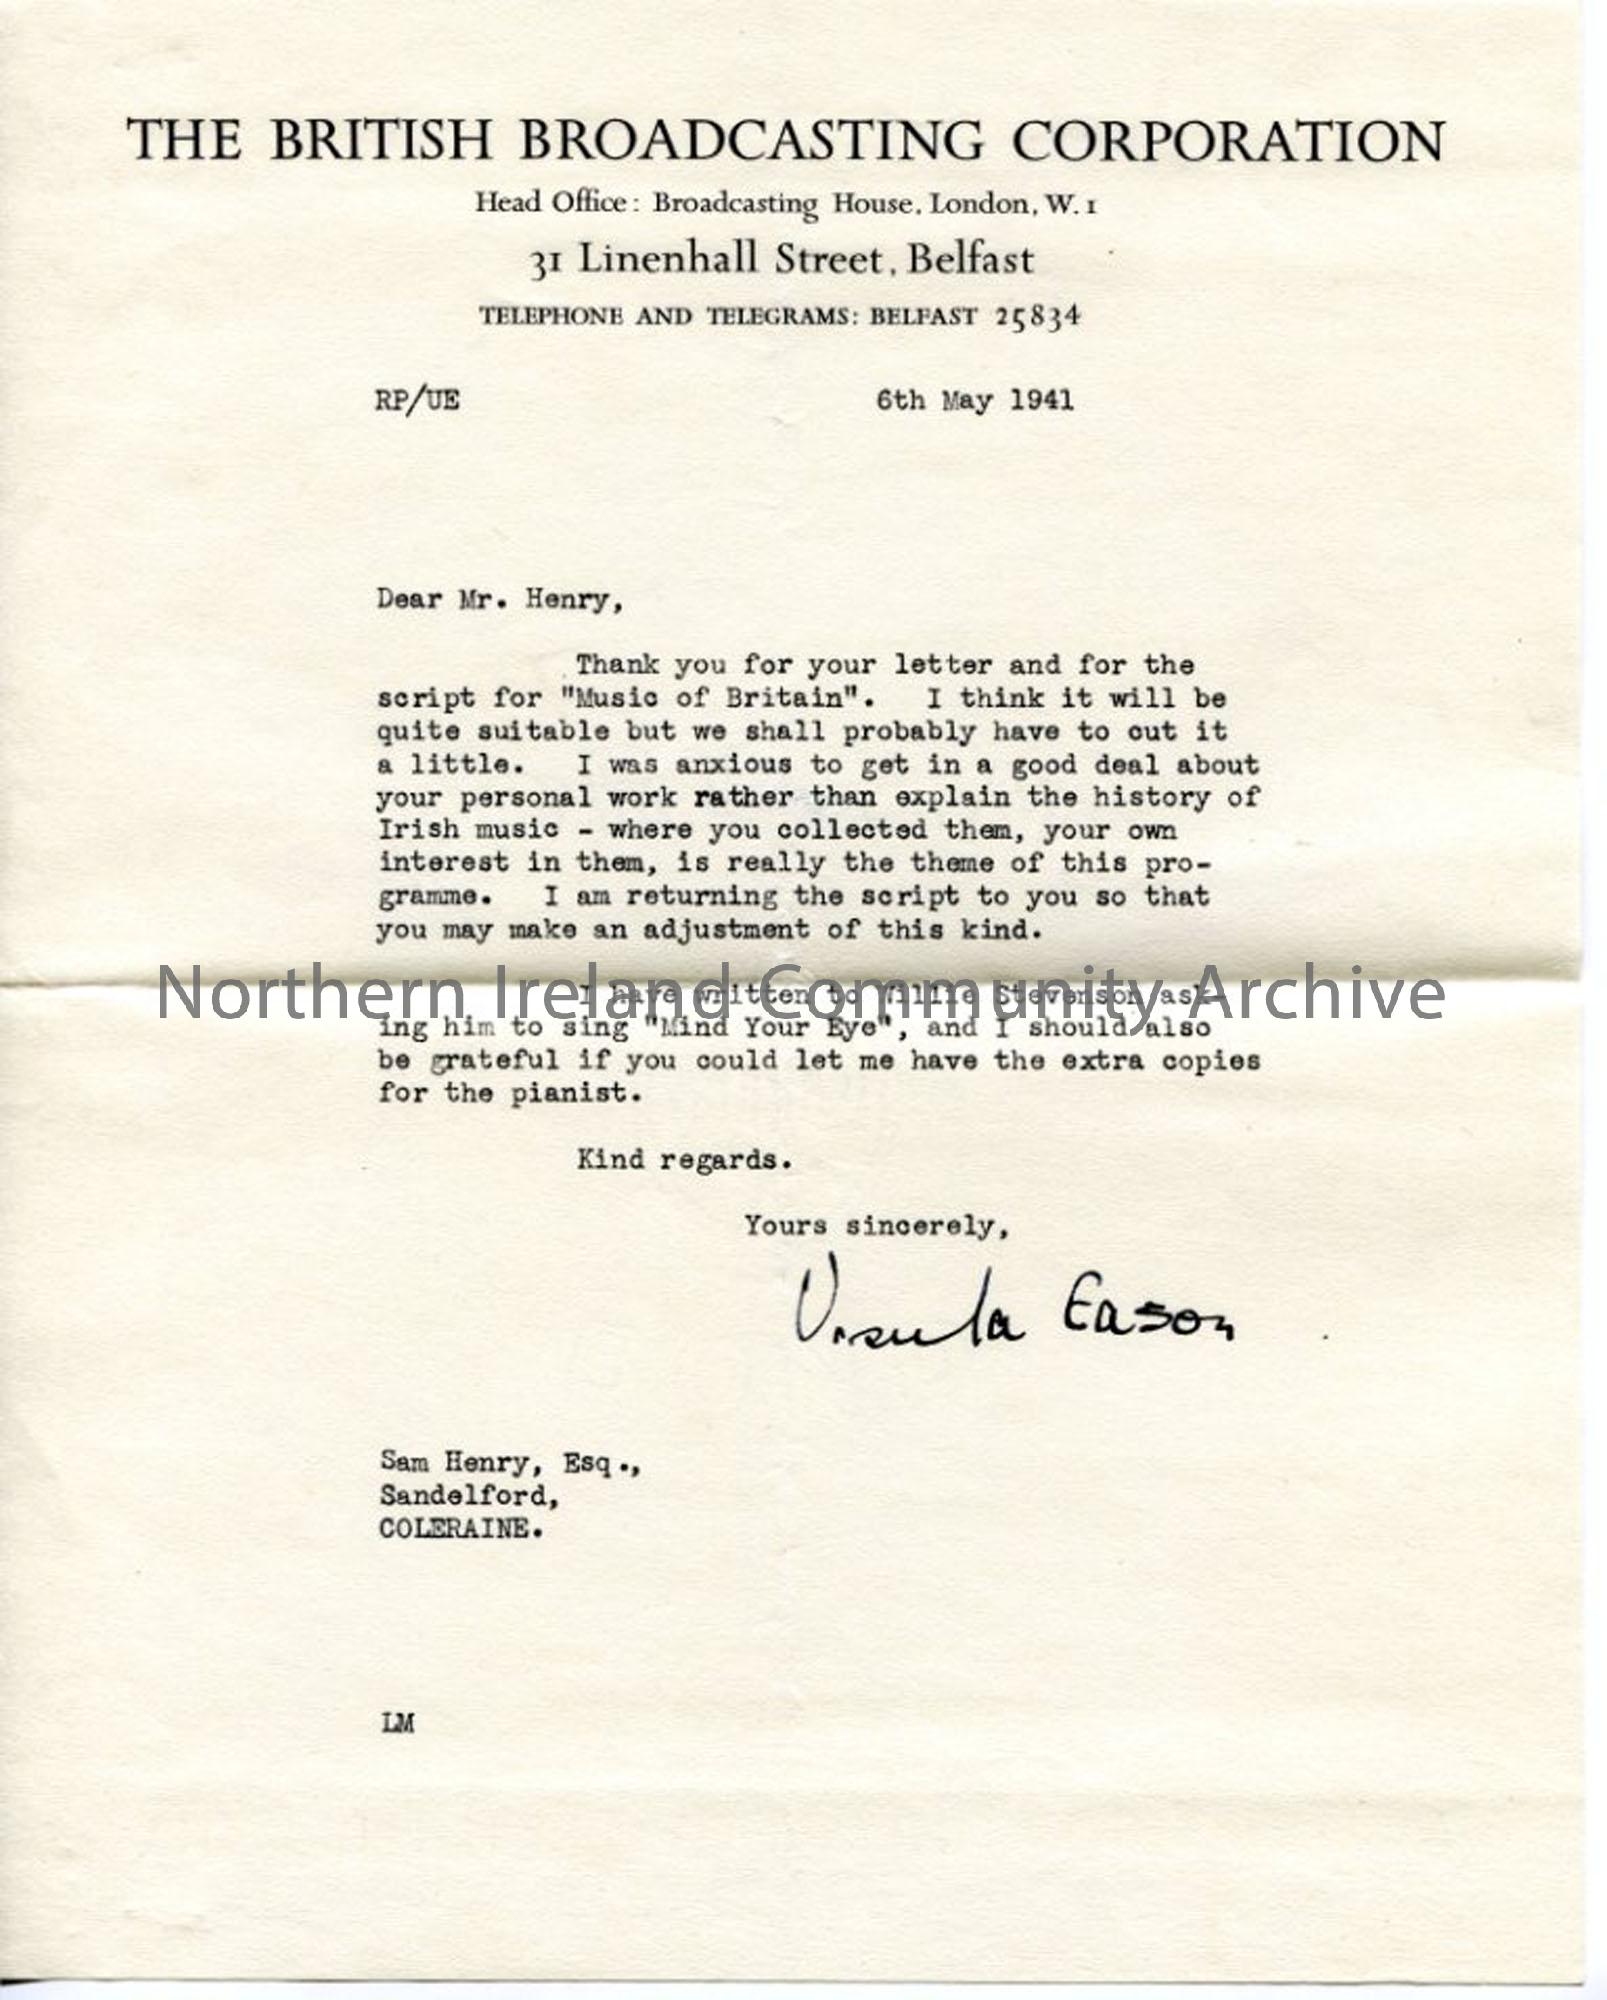 Letter from Ursula Eason of the BBC, dated 6.5.1941